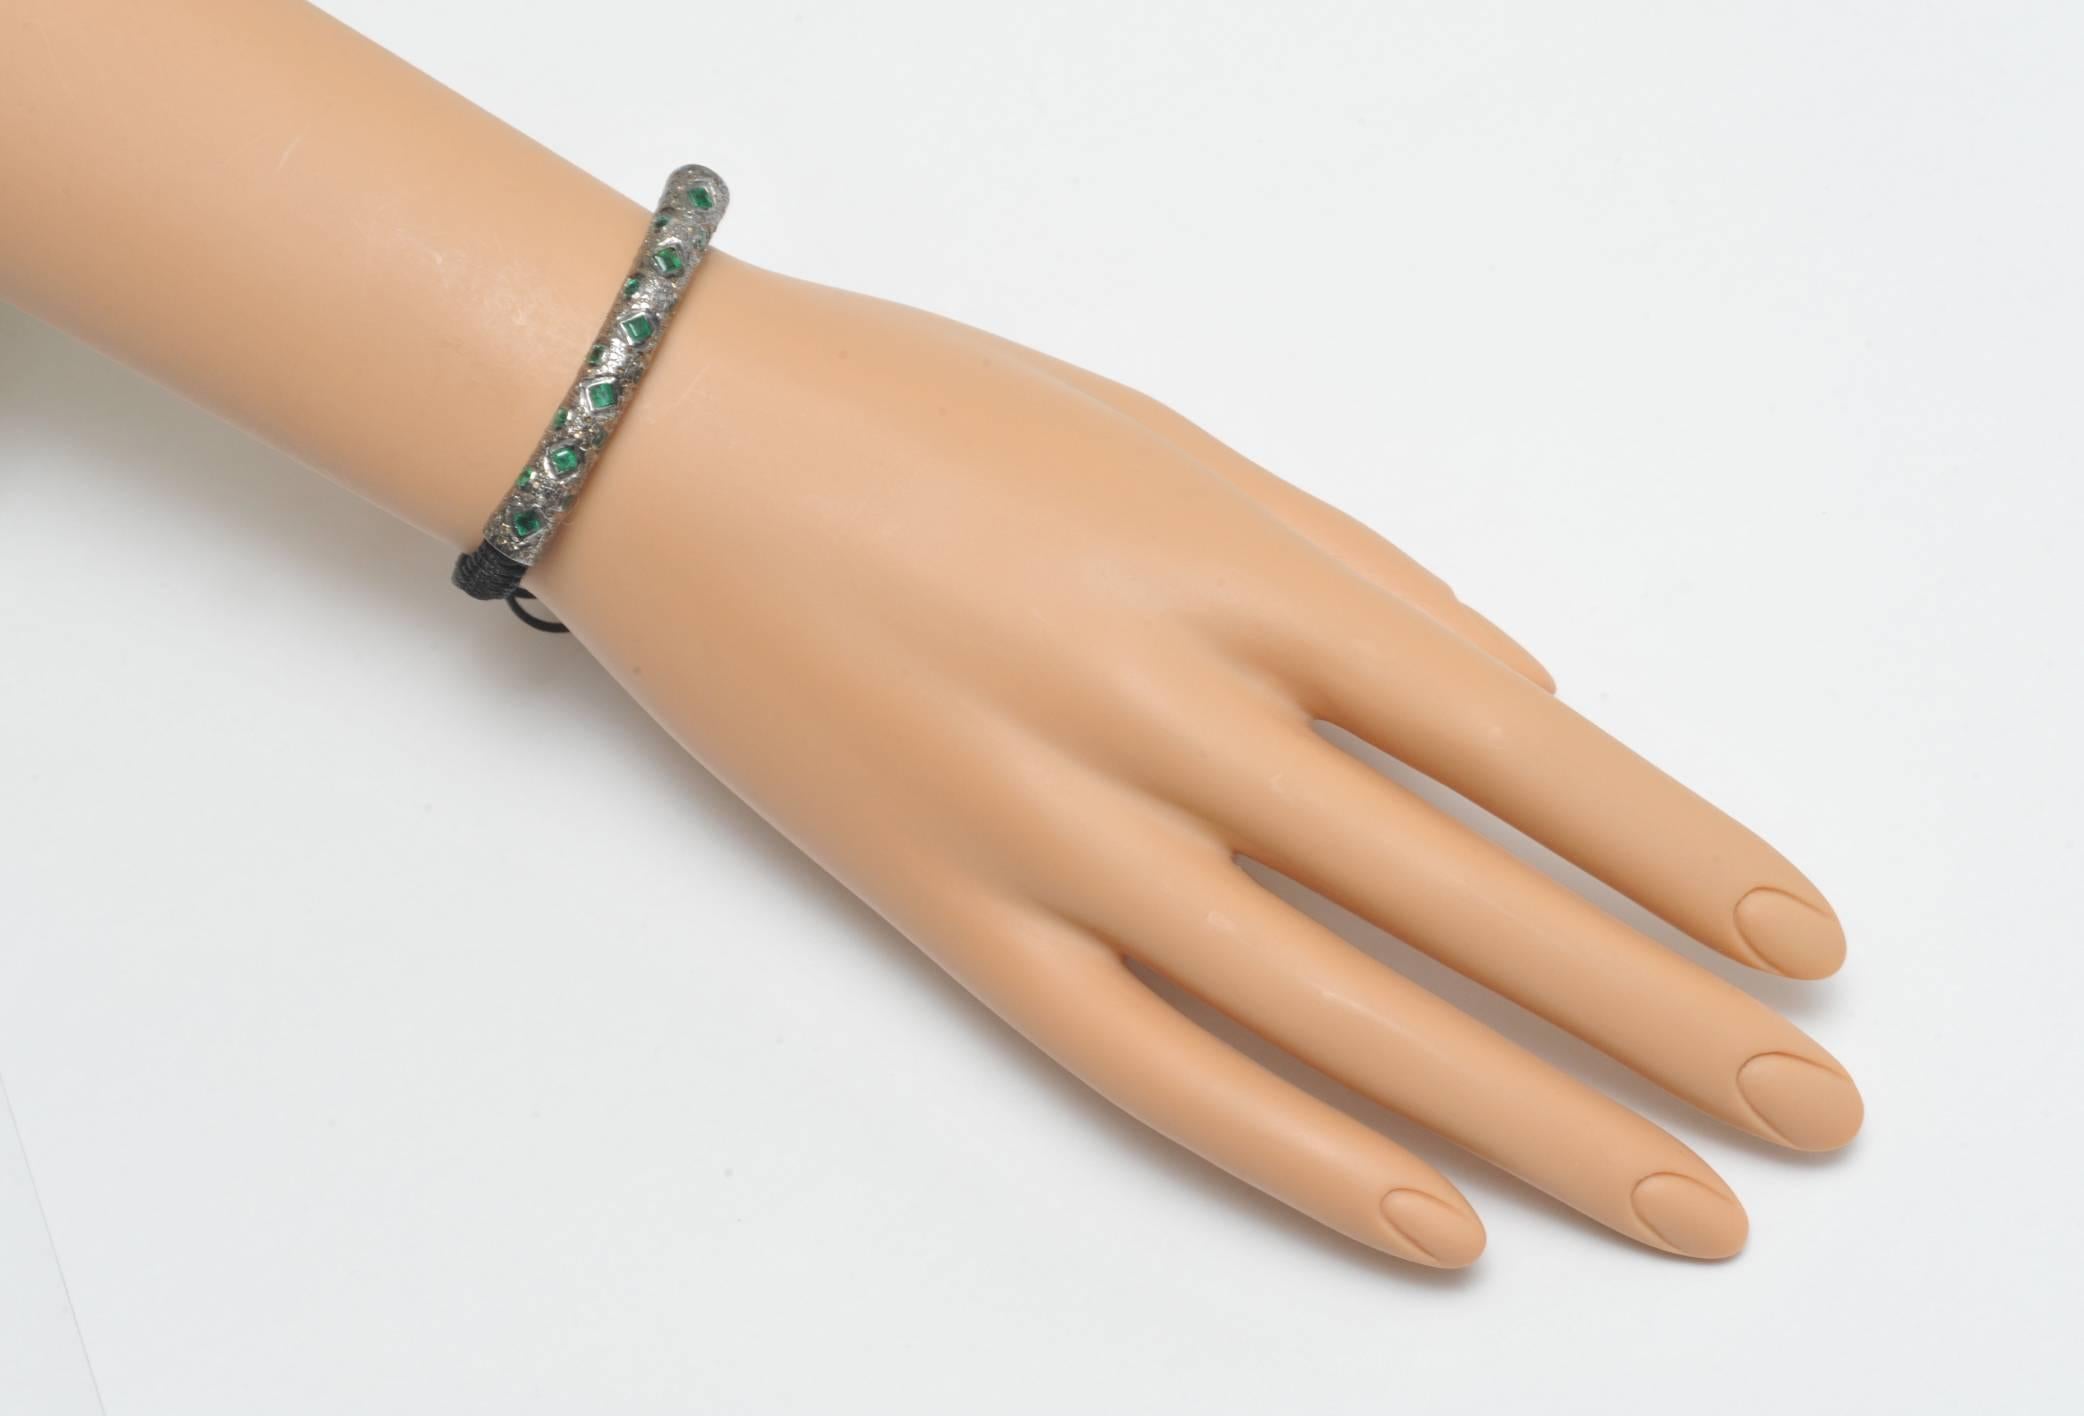 Now this is a cool thing.  emeralds  and diamonds set in sterling silver on a woven cotton adjustable band.  Go anywhere type of bracelet.  Carat weight of emeralds is 1.69  , Diamonds are 1.54 carats.  Smallest size circumference is 5.75 inches.  